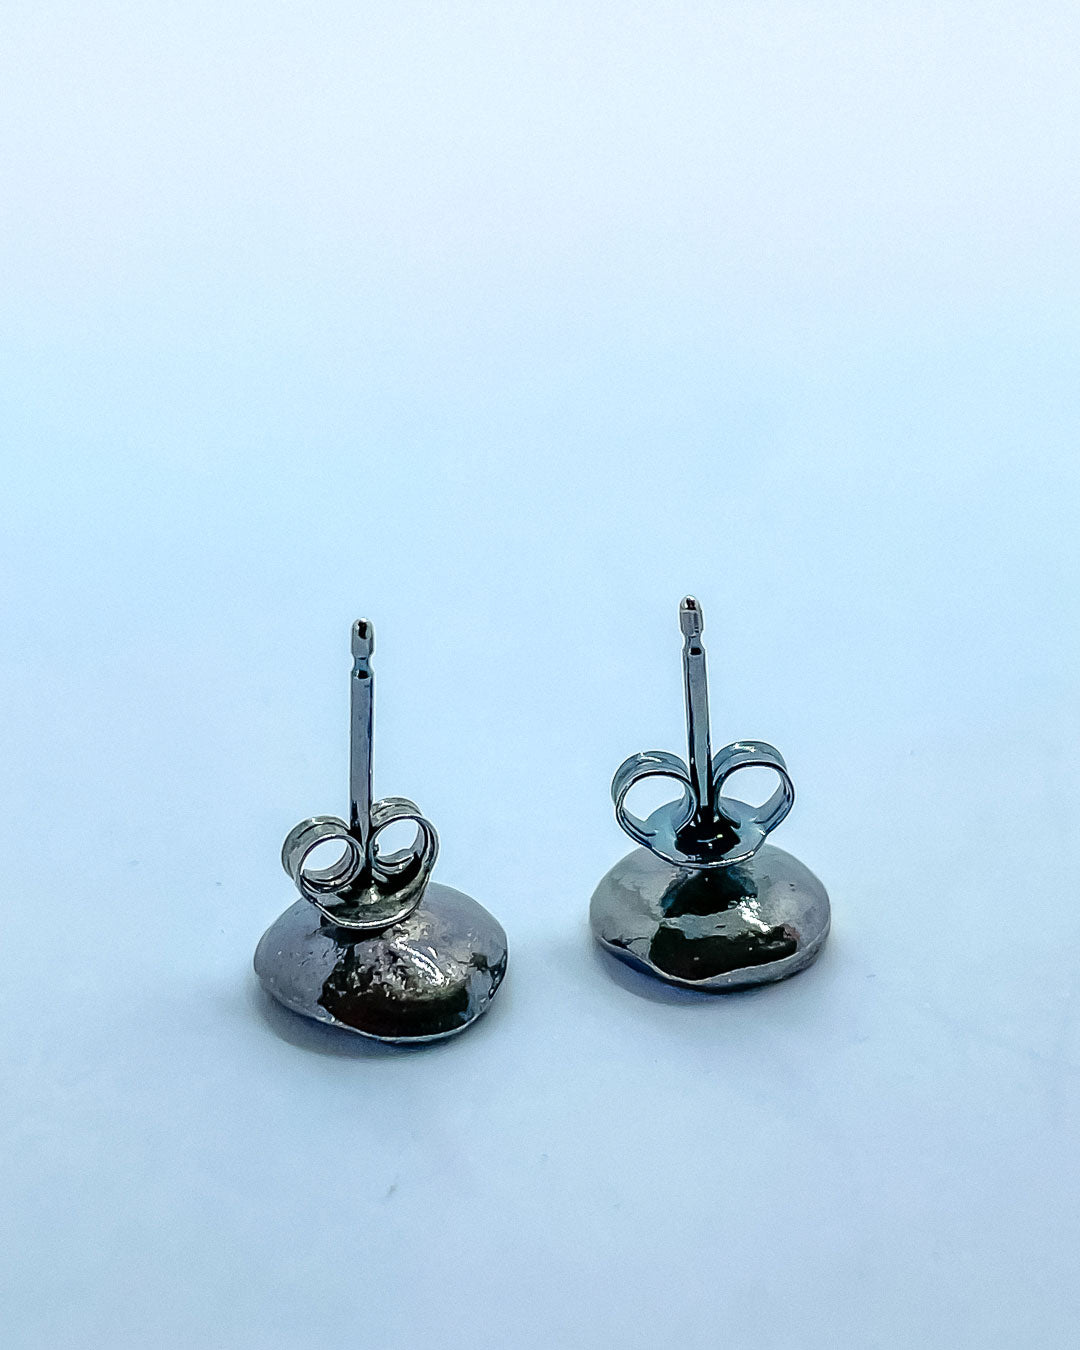 Showing the back of two concave stud earrings